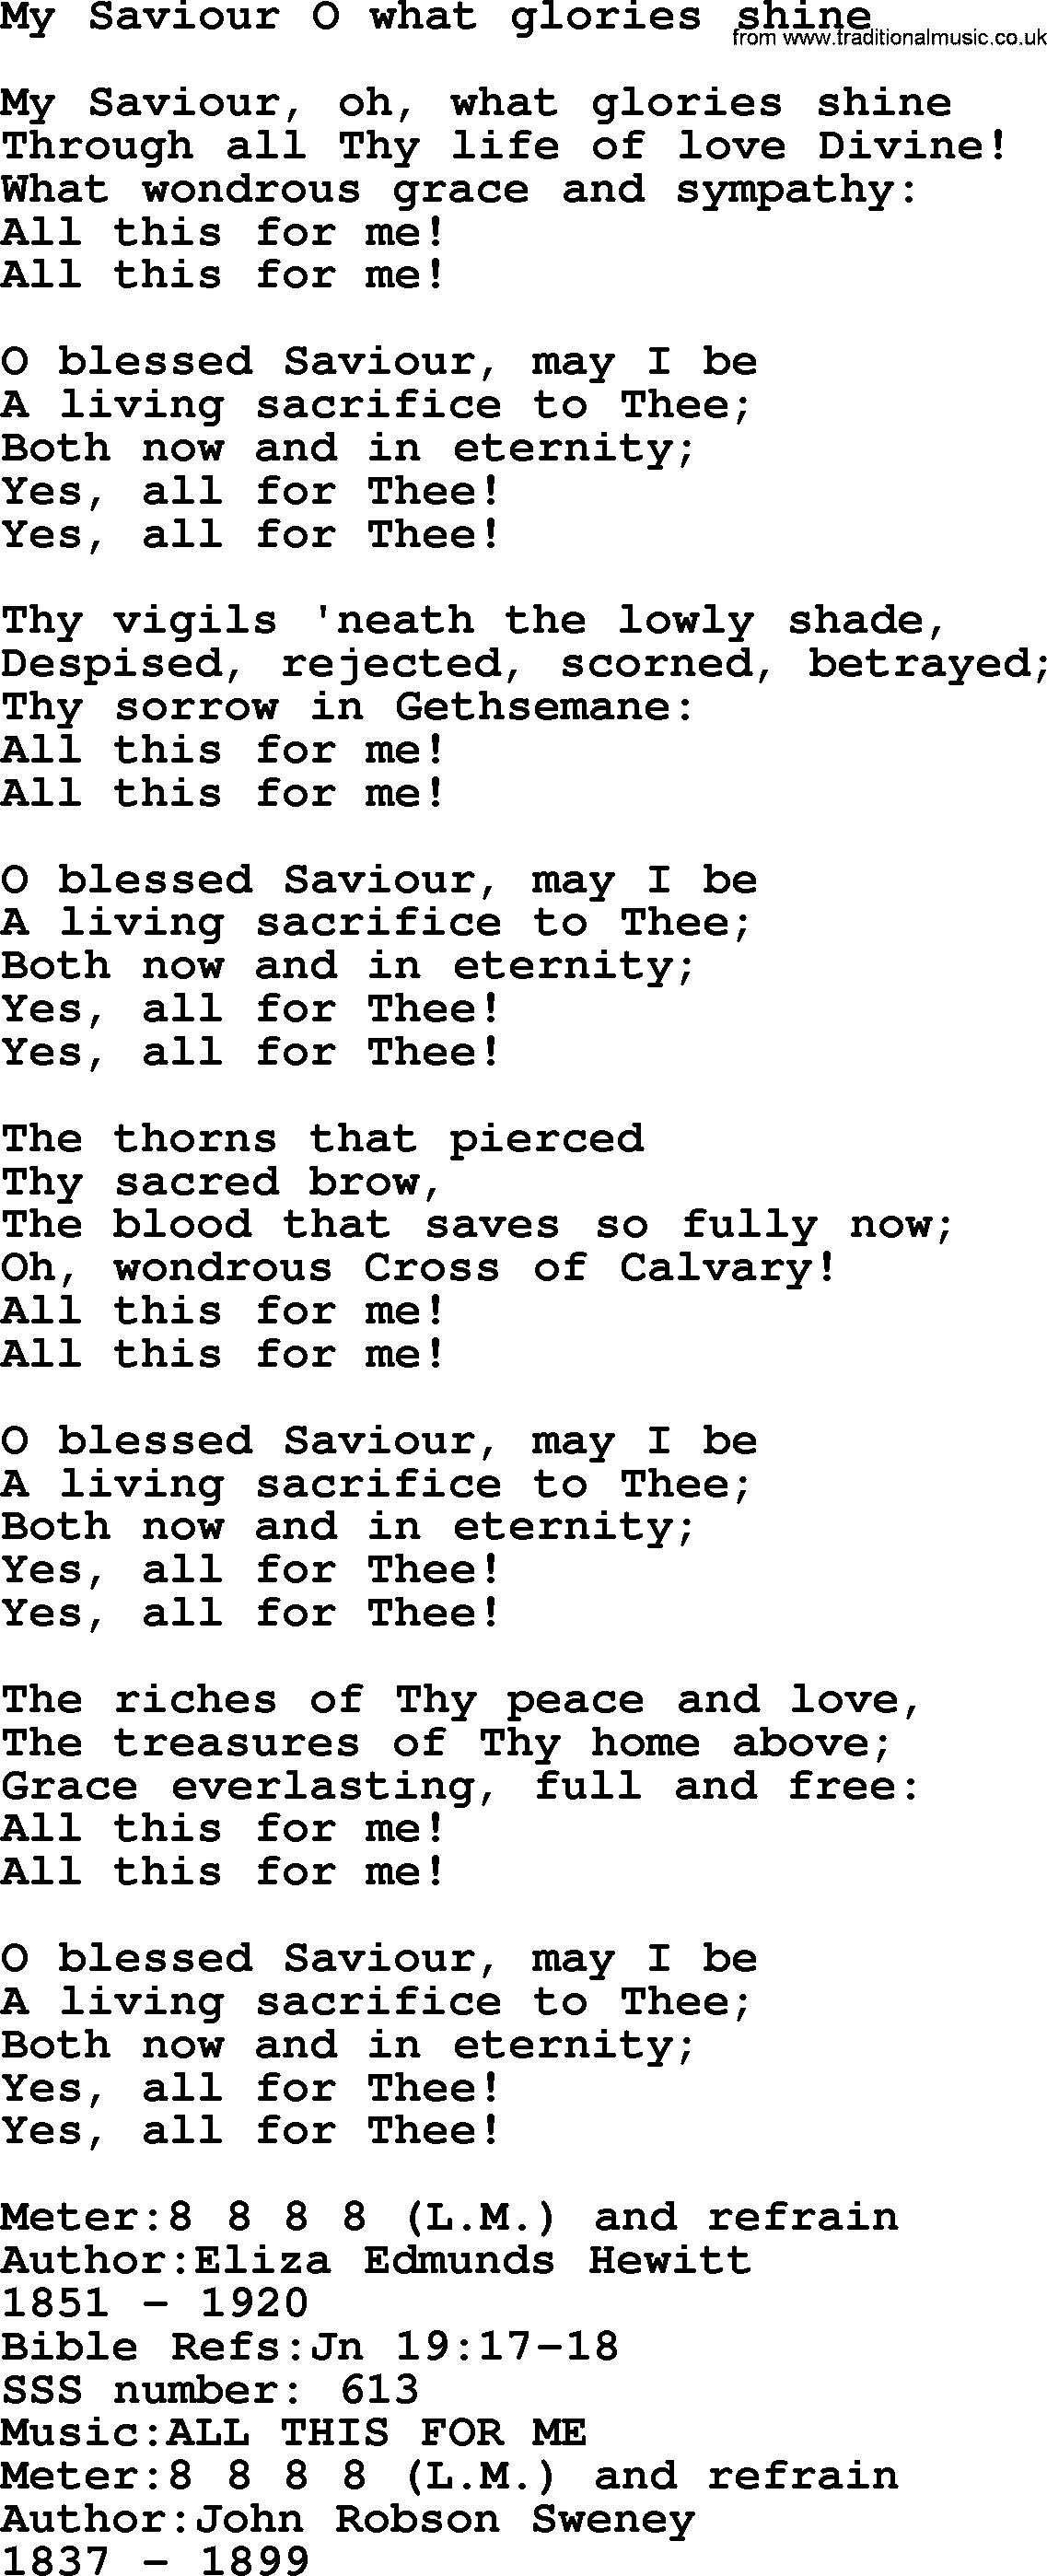 Sacred Songs and Solos complete, 1200 Hymns, title: My Saviour O What Glories Shine, lyrics and PDF